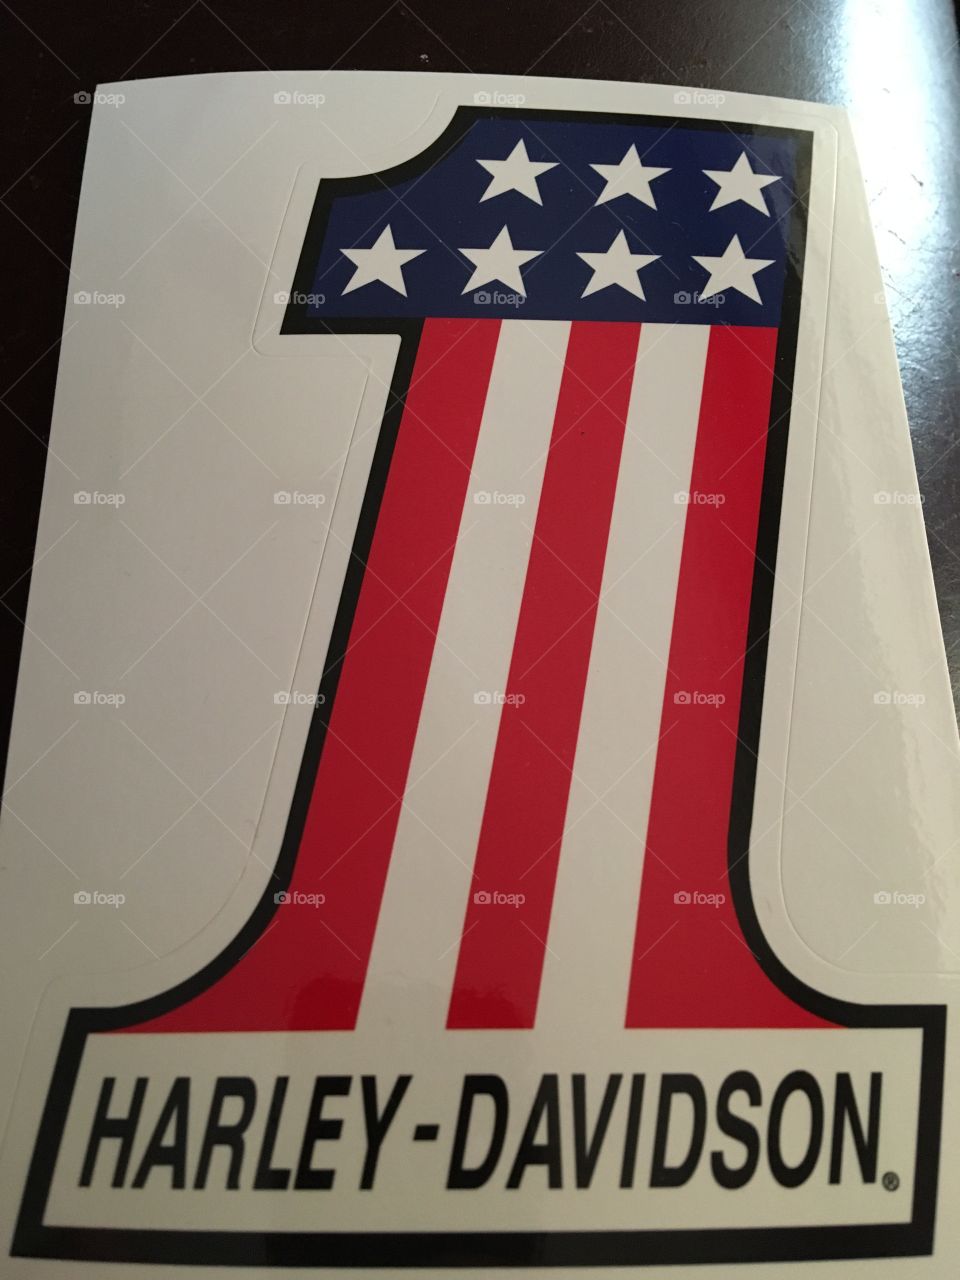 Who doesn’t love a Harley? This sticker belongs on one to show American pride!